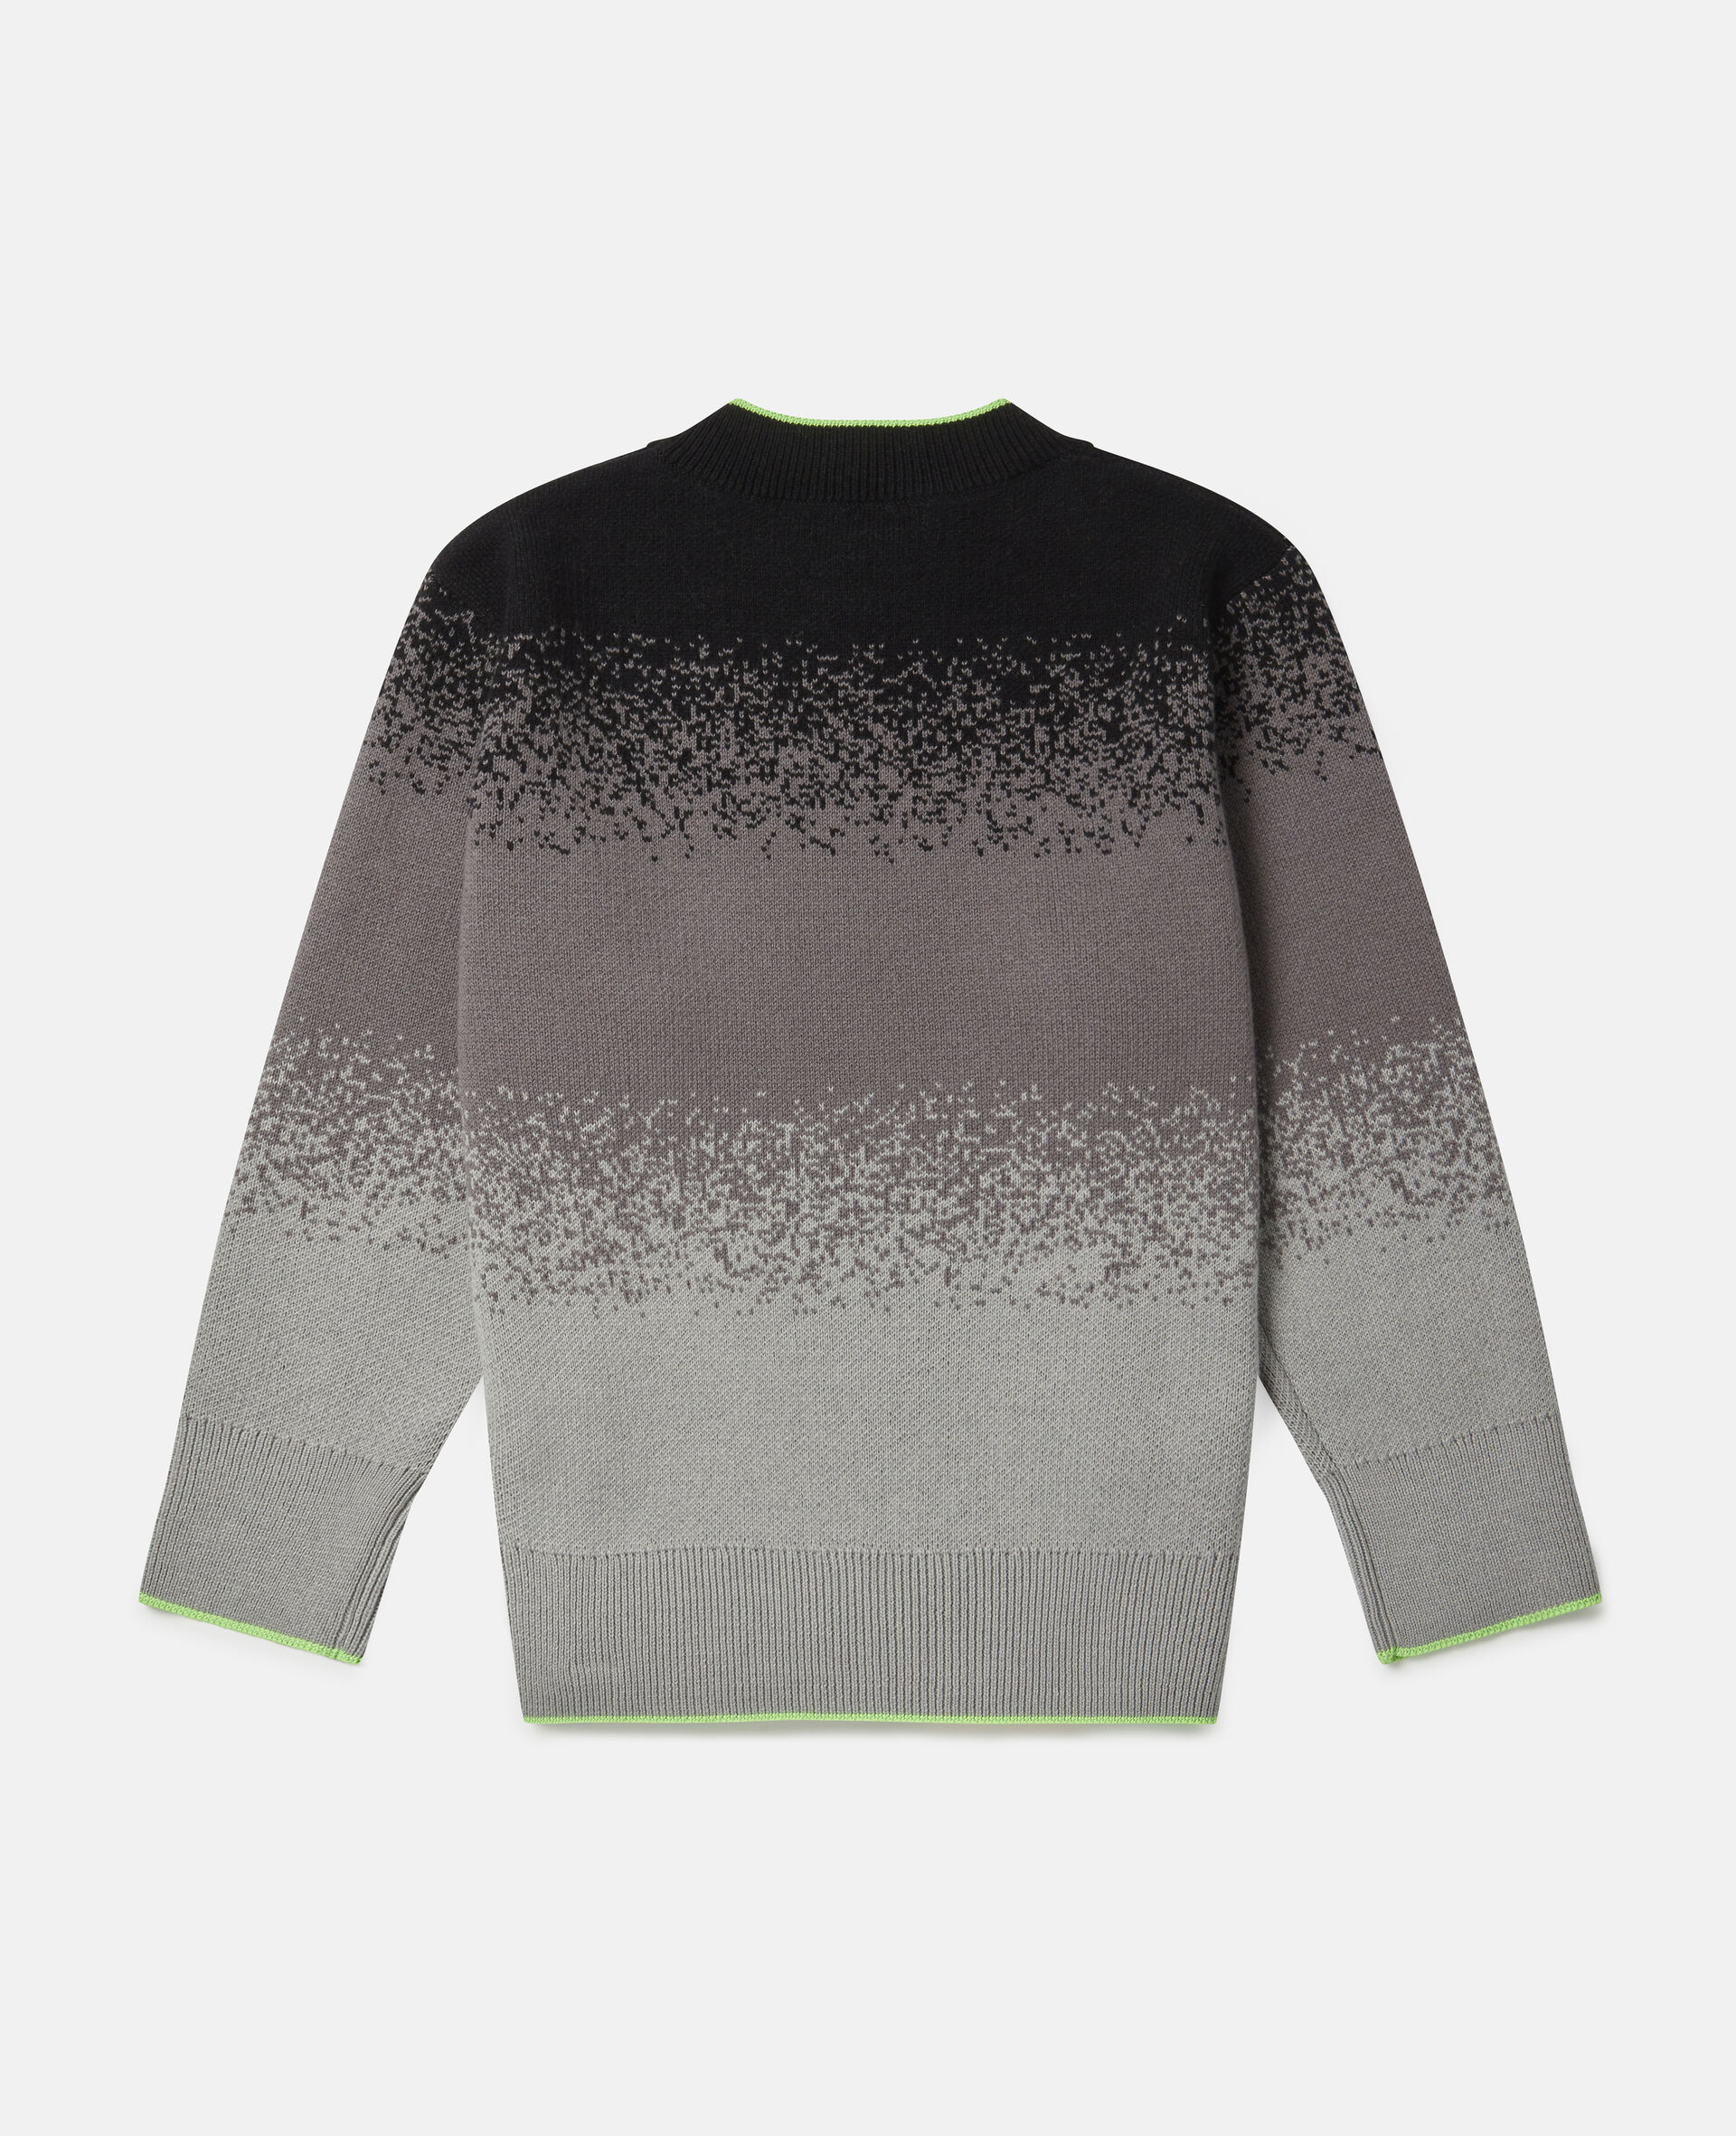 Spray Painted Effect Oversized Knit Sweater-Grey-large image number 3